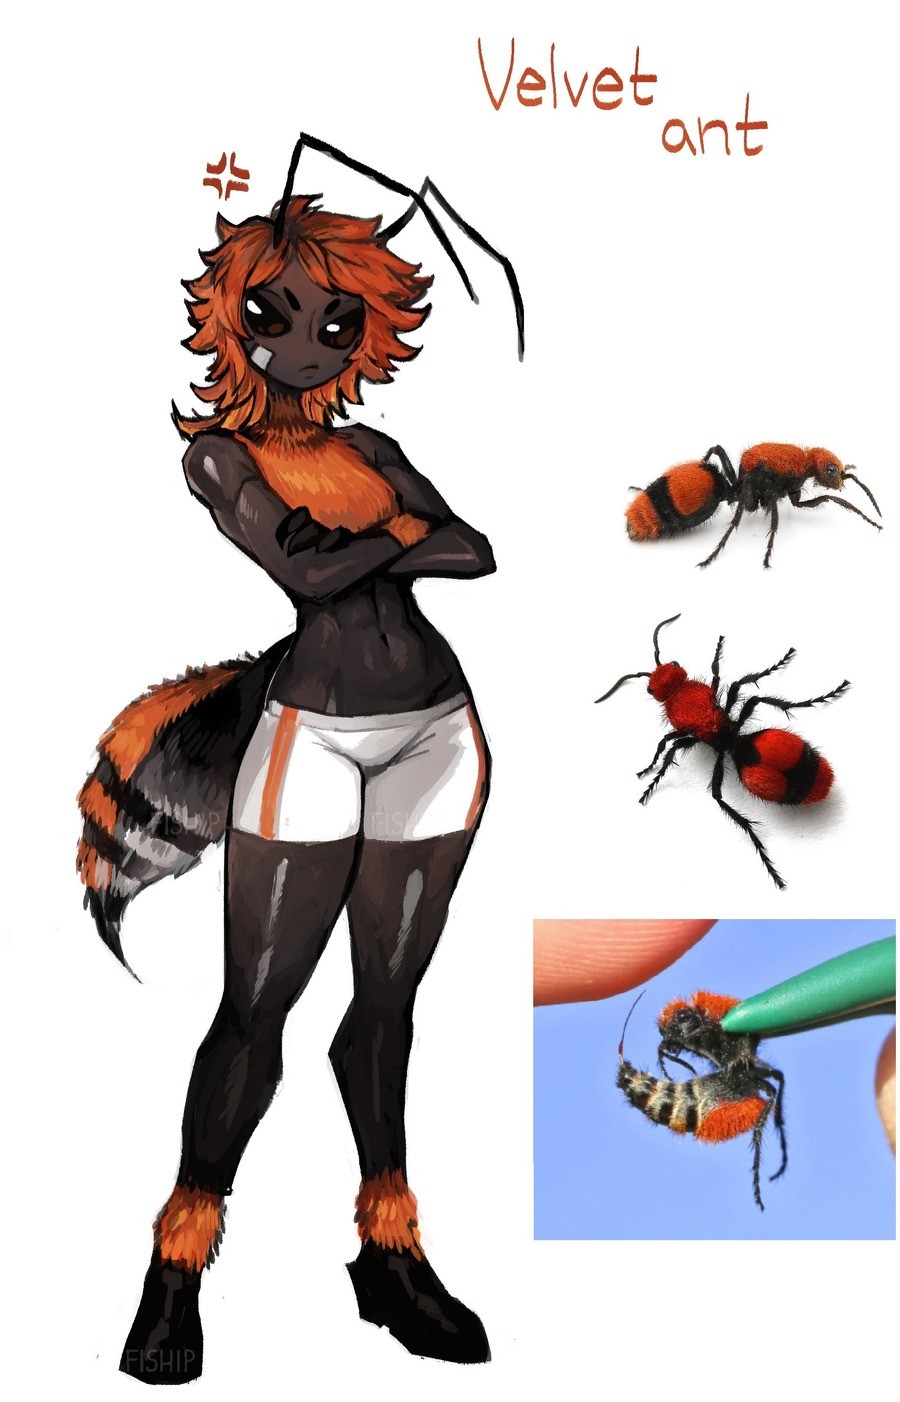 Velvet Ant and Tarantula Hawk. join list: KlictiChasers (215 subs)Mention History.. 2 prime examples of &quot;LEAVE IT THE ALONE&quot;.